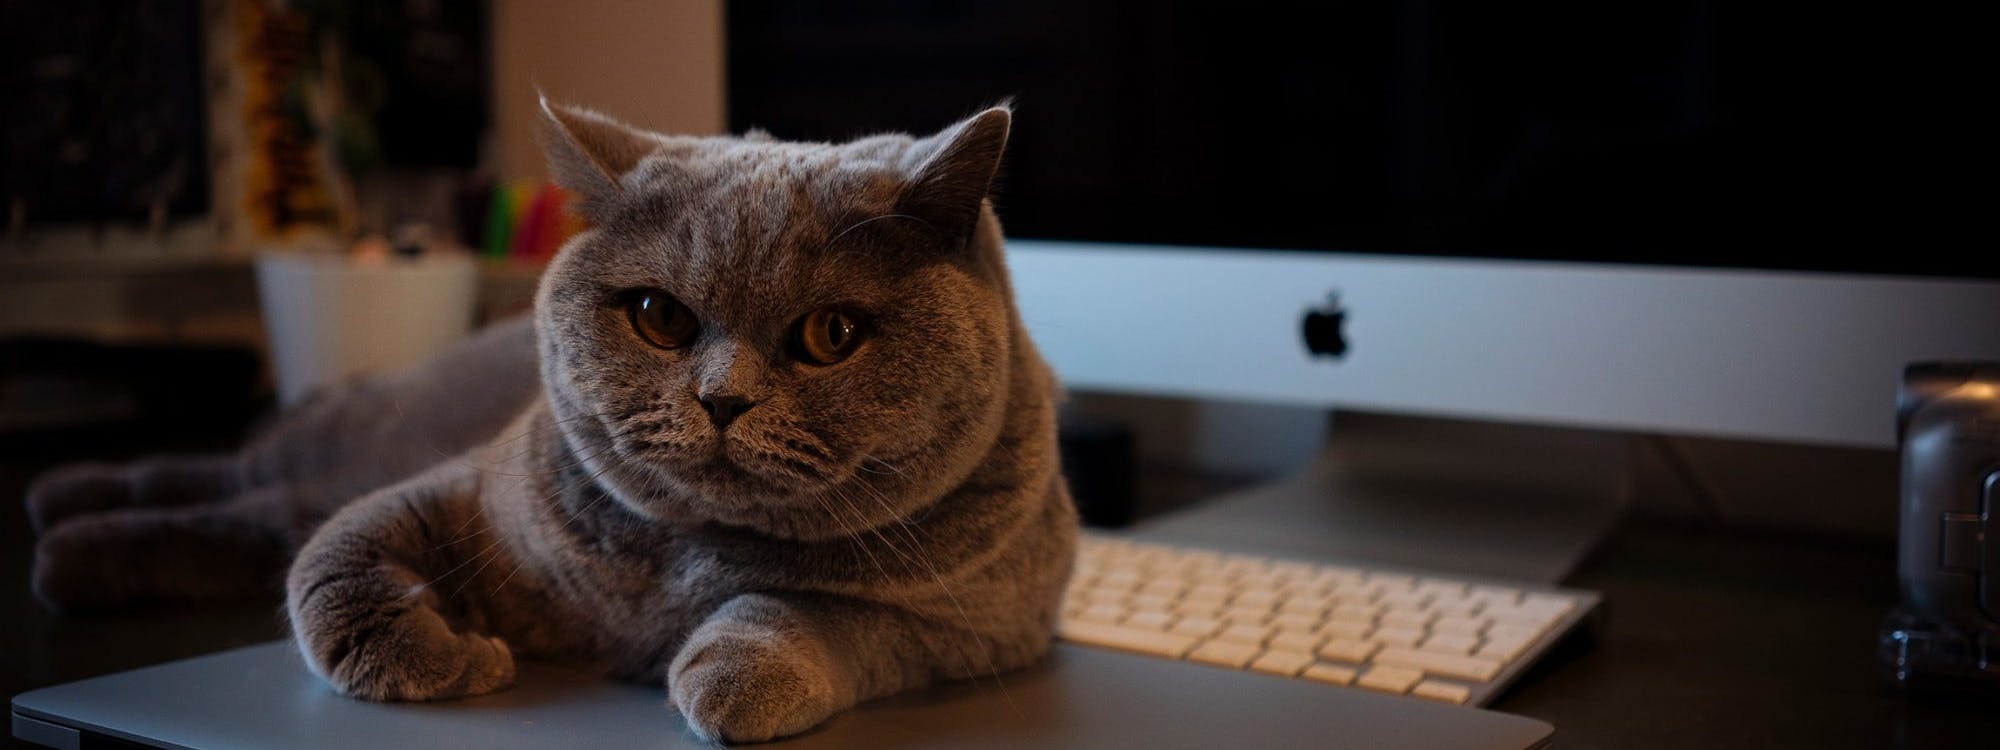 A large cat sitting in front of a computer